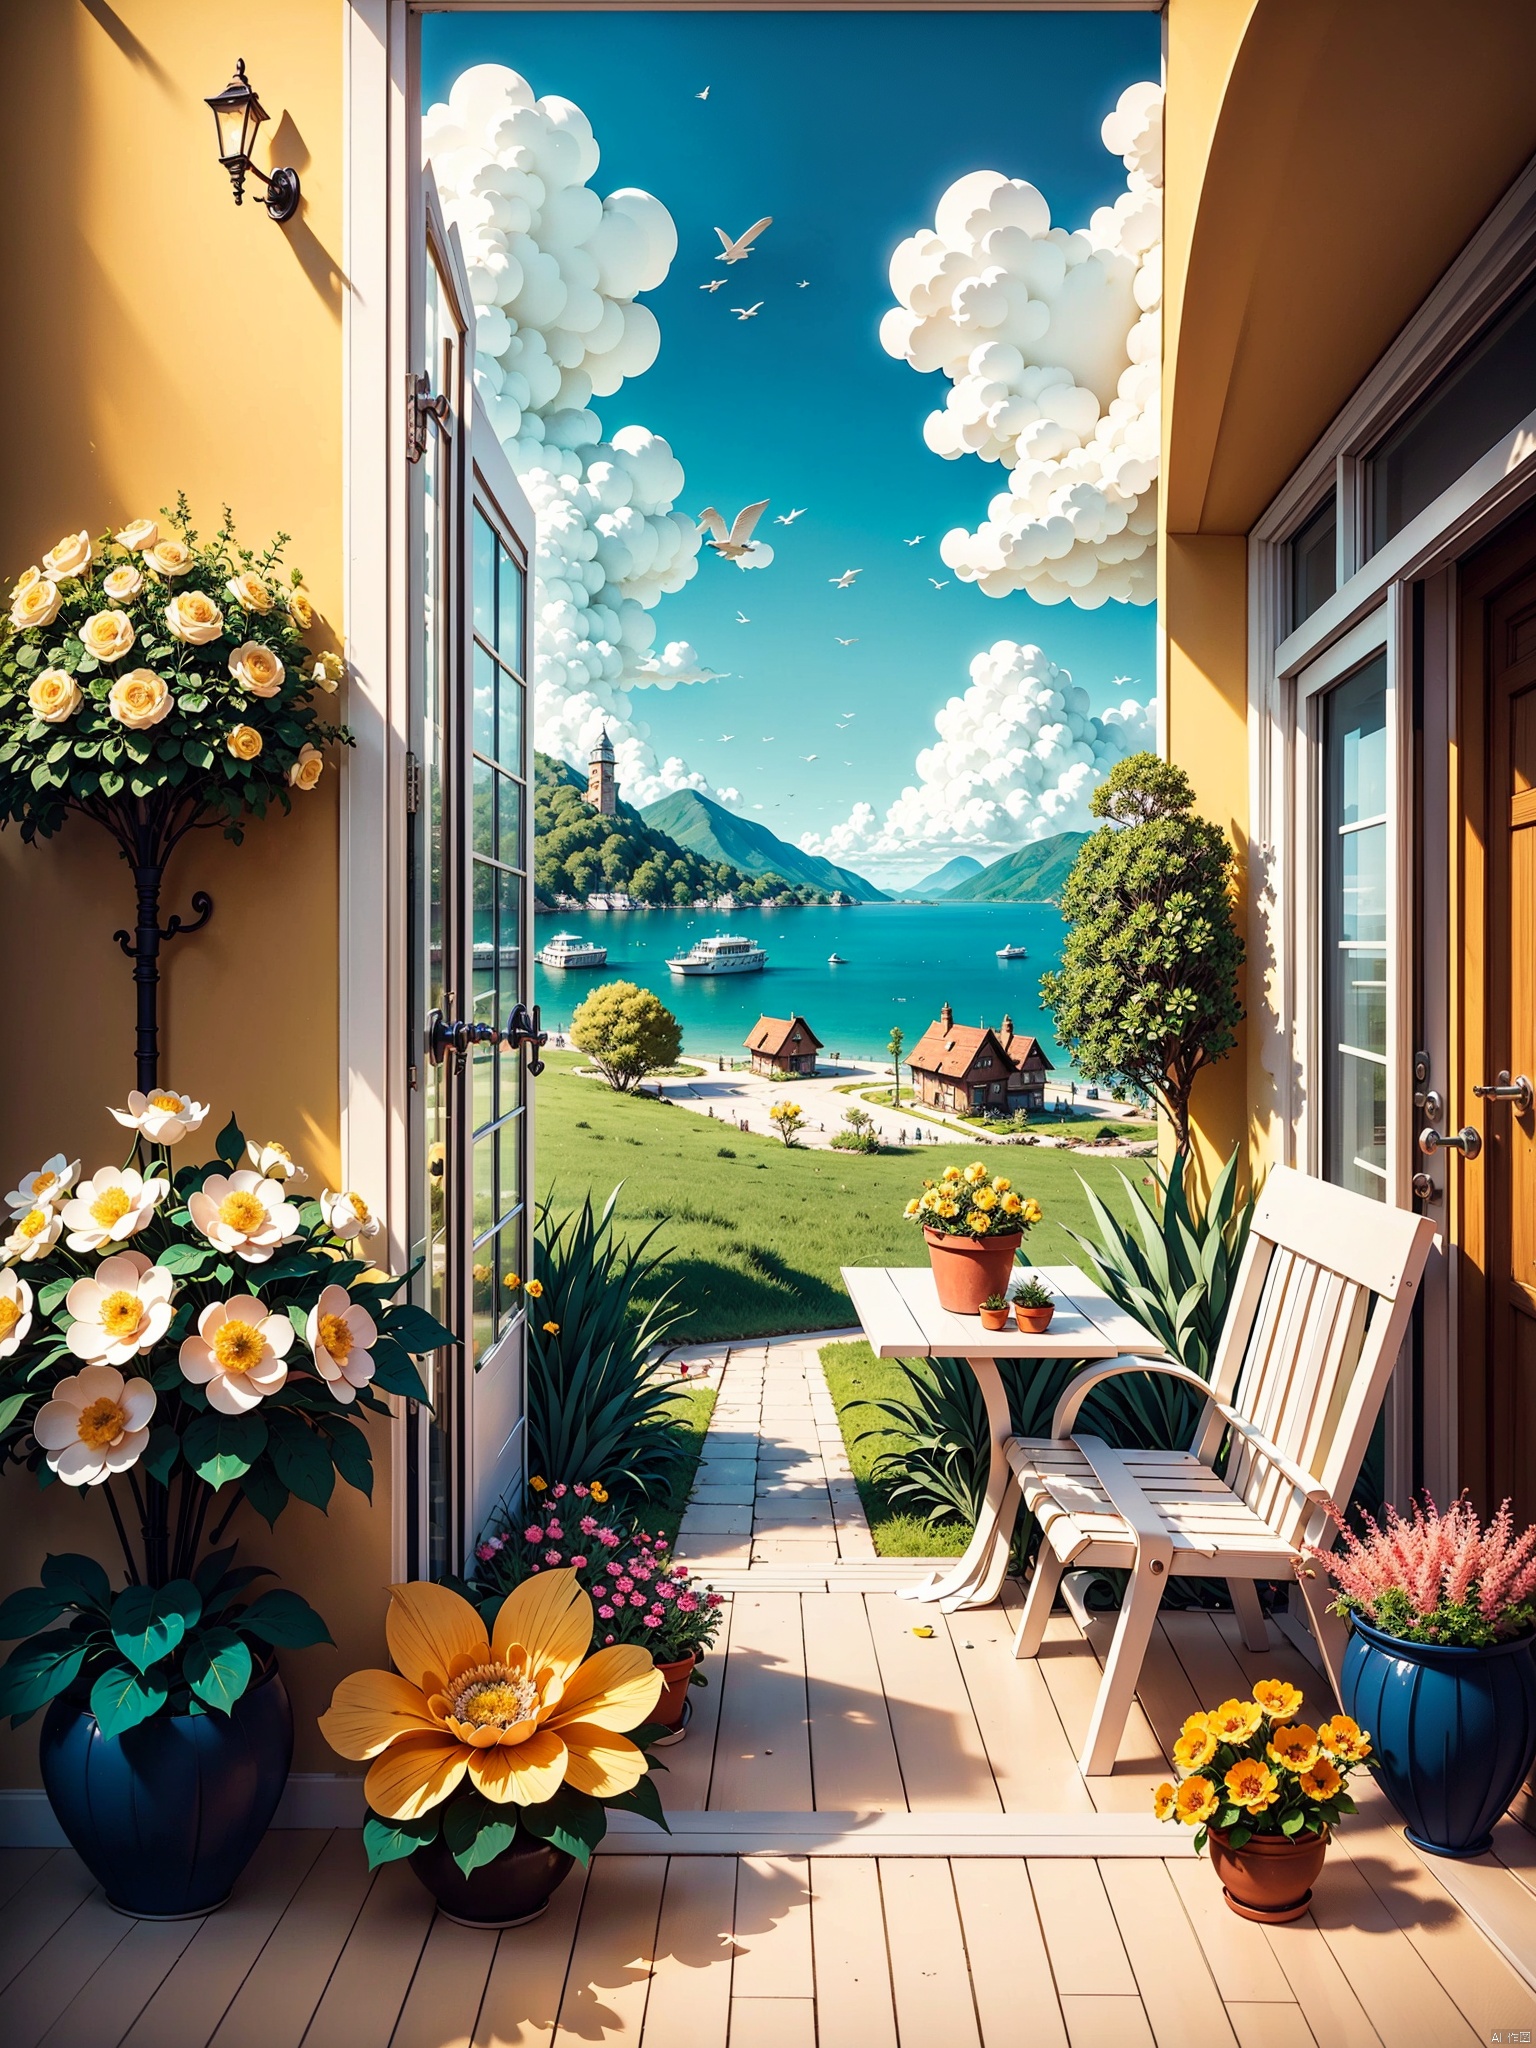 Swiss town, sea, seaside, scenery, house, outdoor, sky, windows, plants, coconut trees, sunshades, leisure chairs, tables and chairs, grass, clouds, potted plants, trees, doors, flower pots, blue sky, buildings, chimneys, yellow flowers, roses, Miyazaki style, Paper Cuttings style,